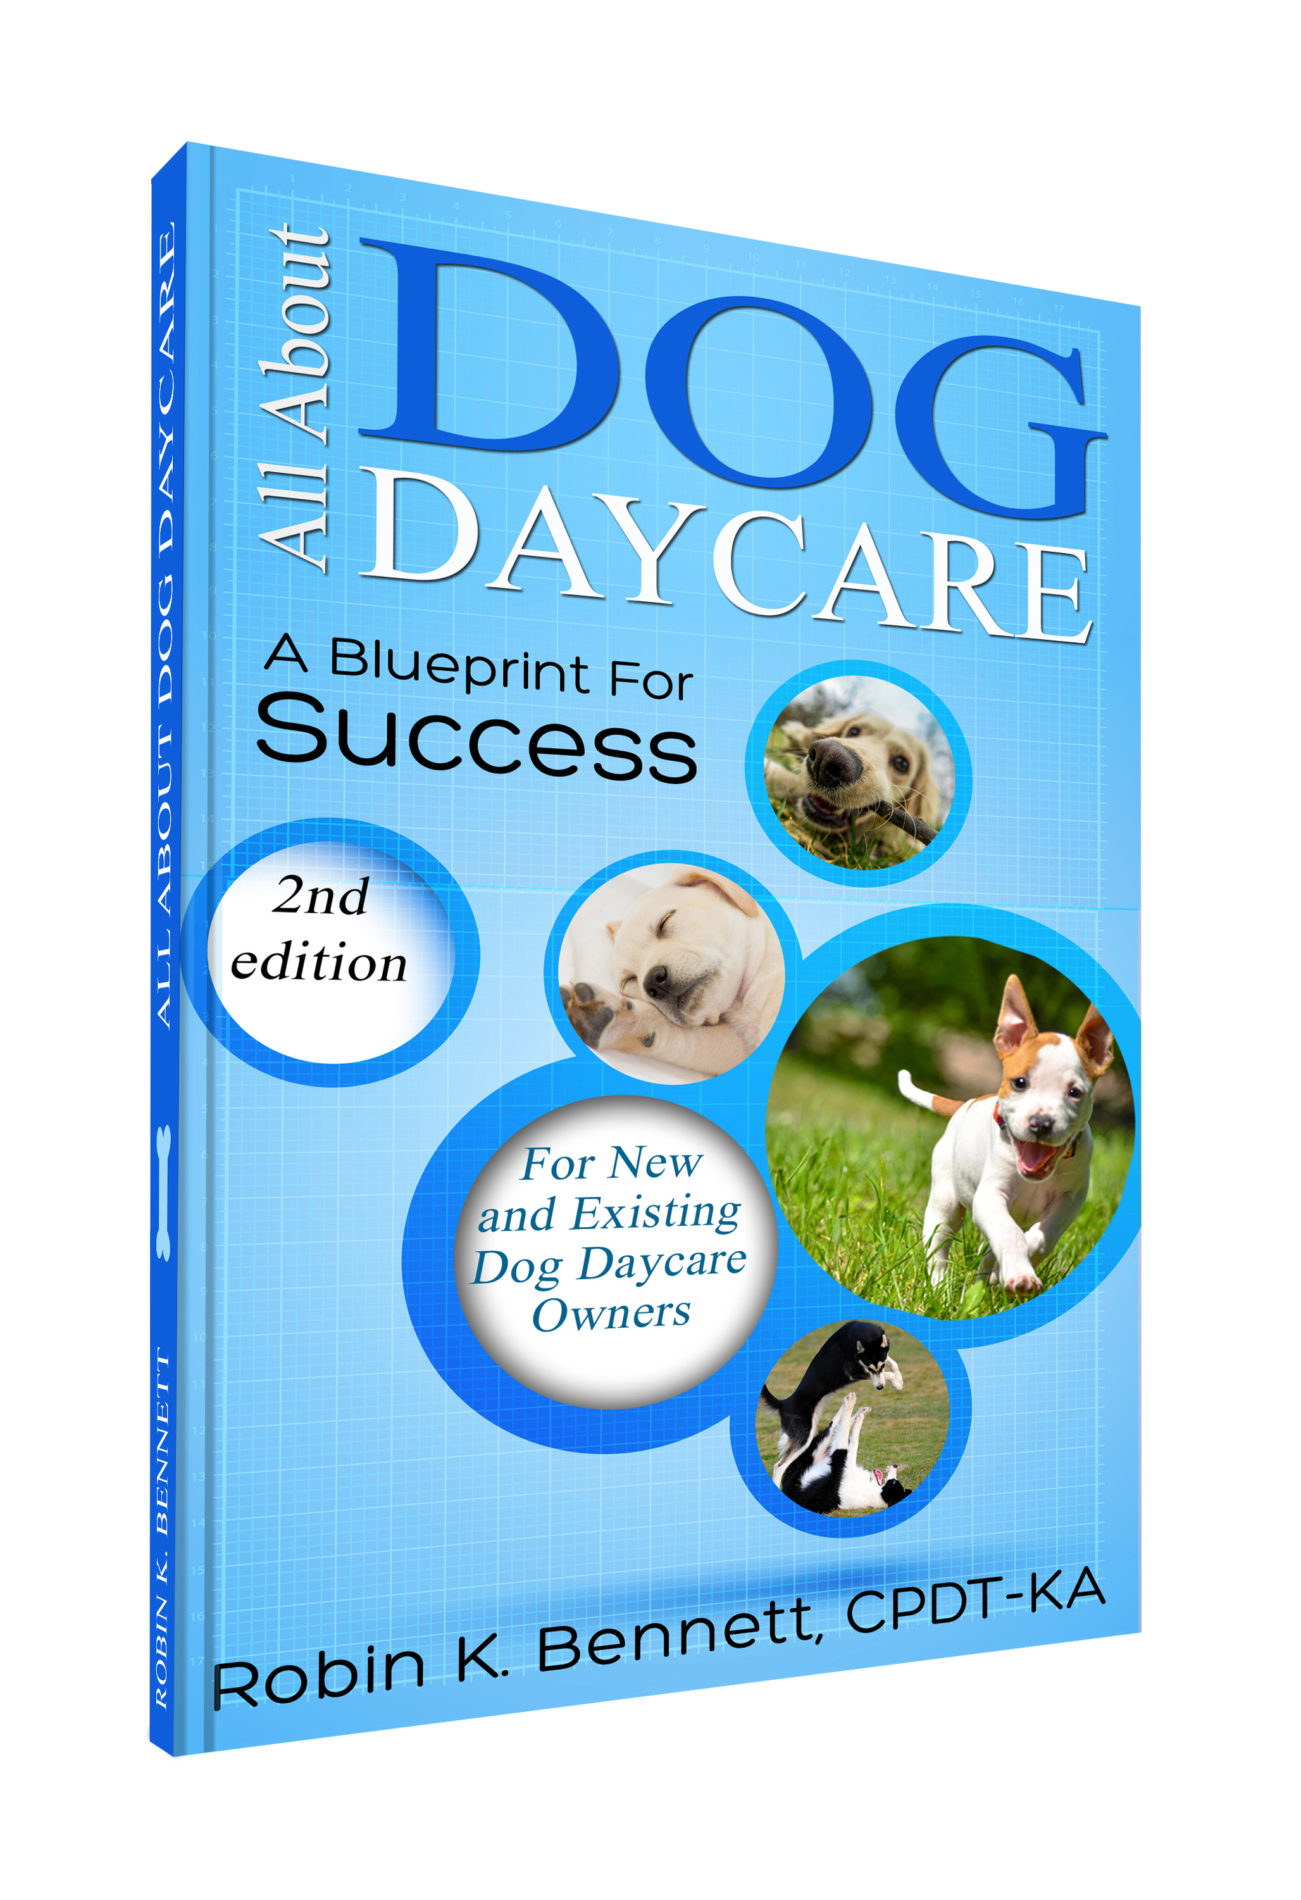 All About Dog Daycare: A Blueprint for Success second edition book cover.